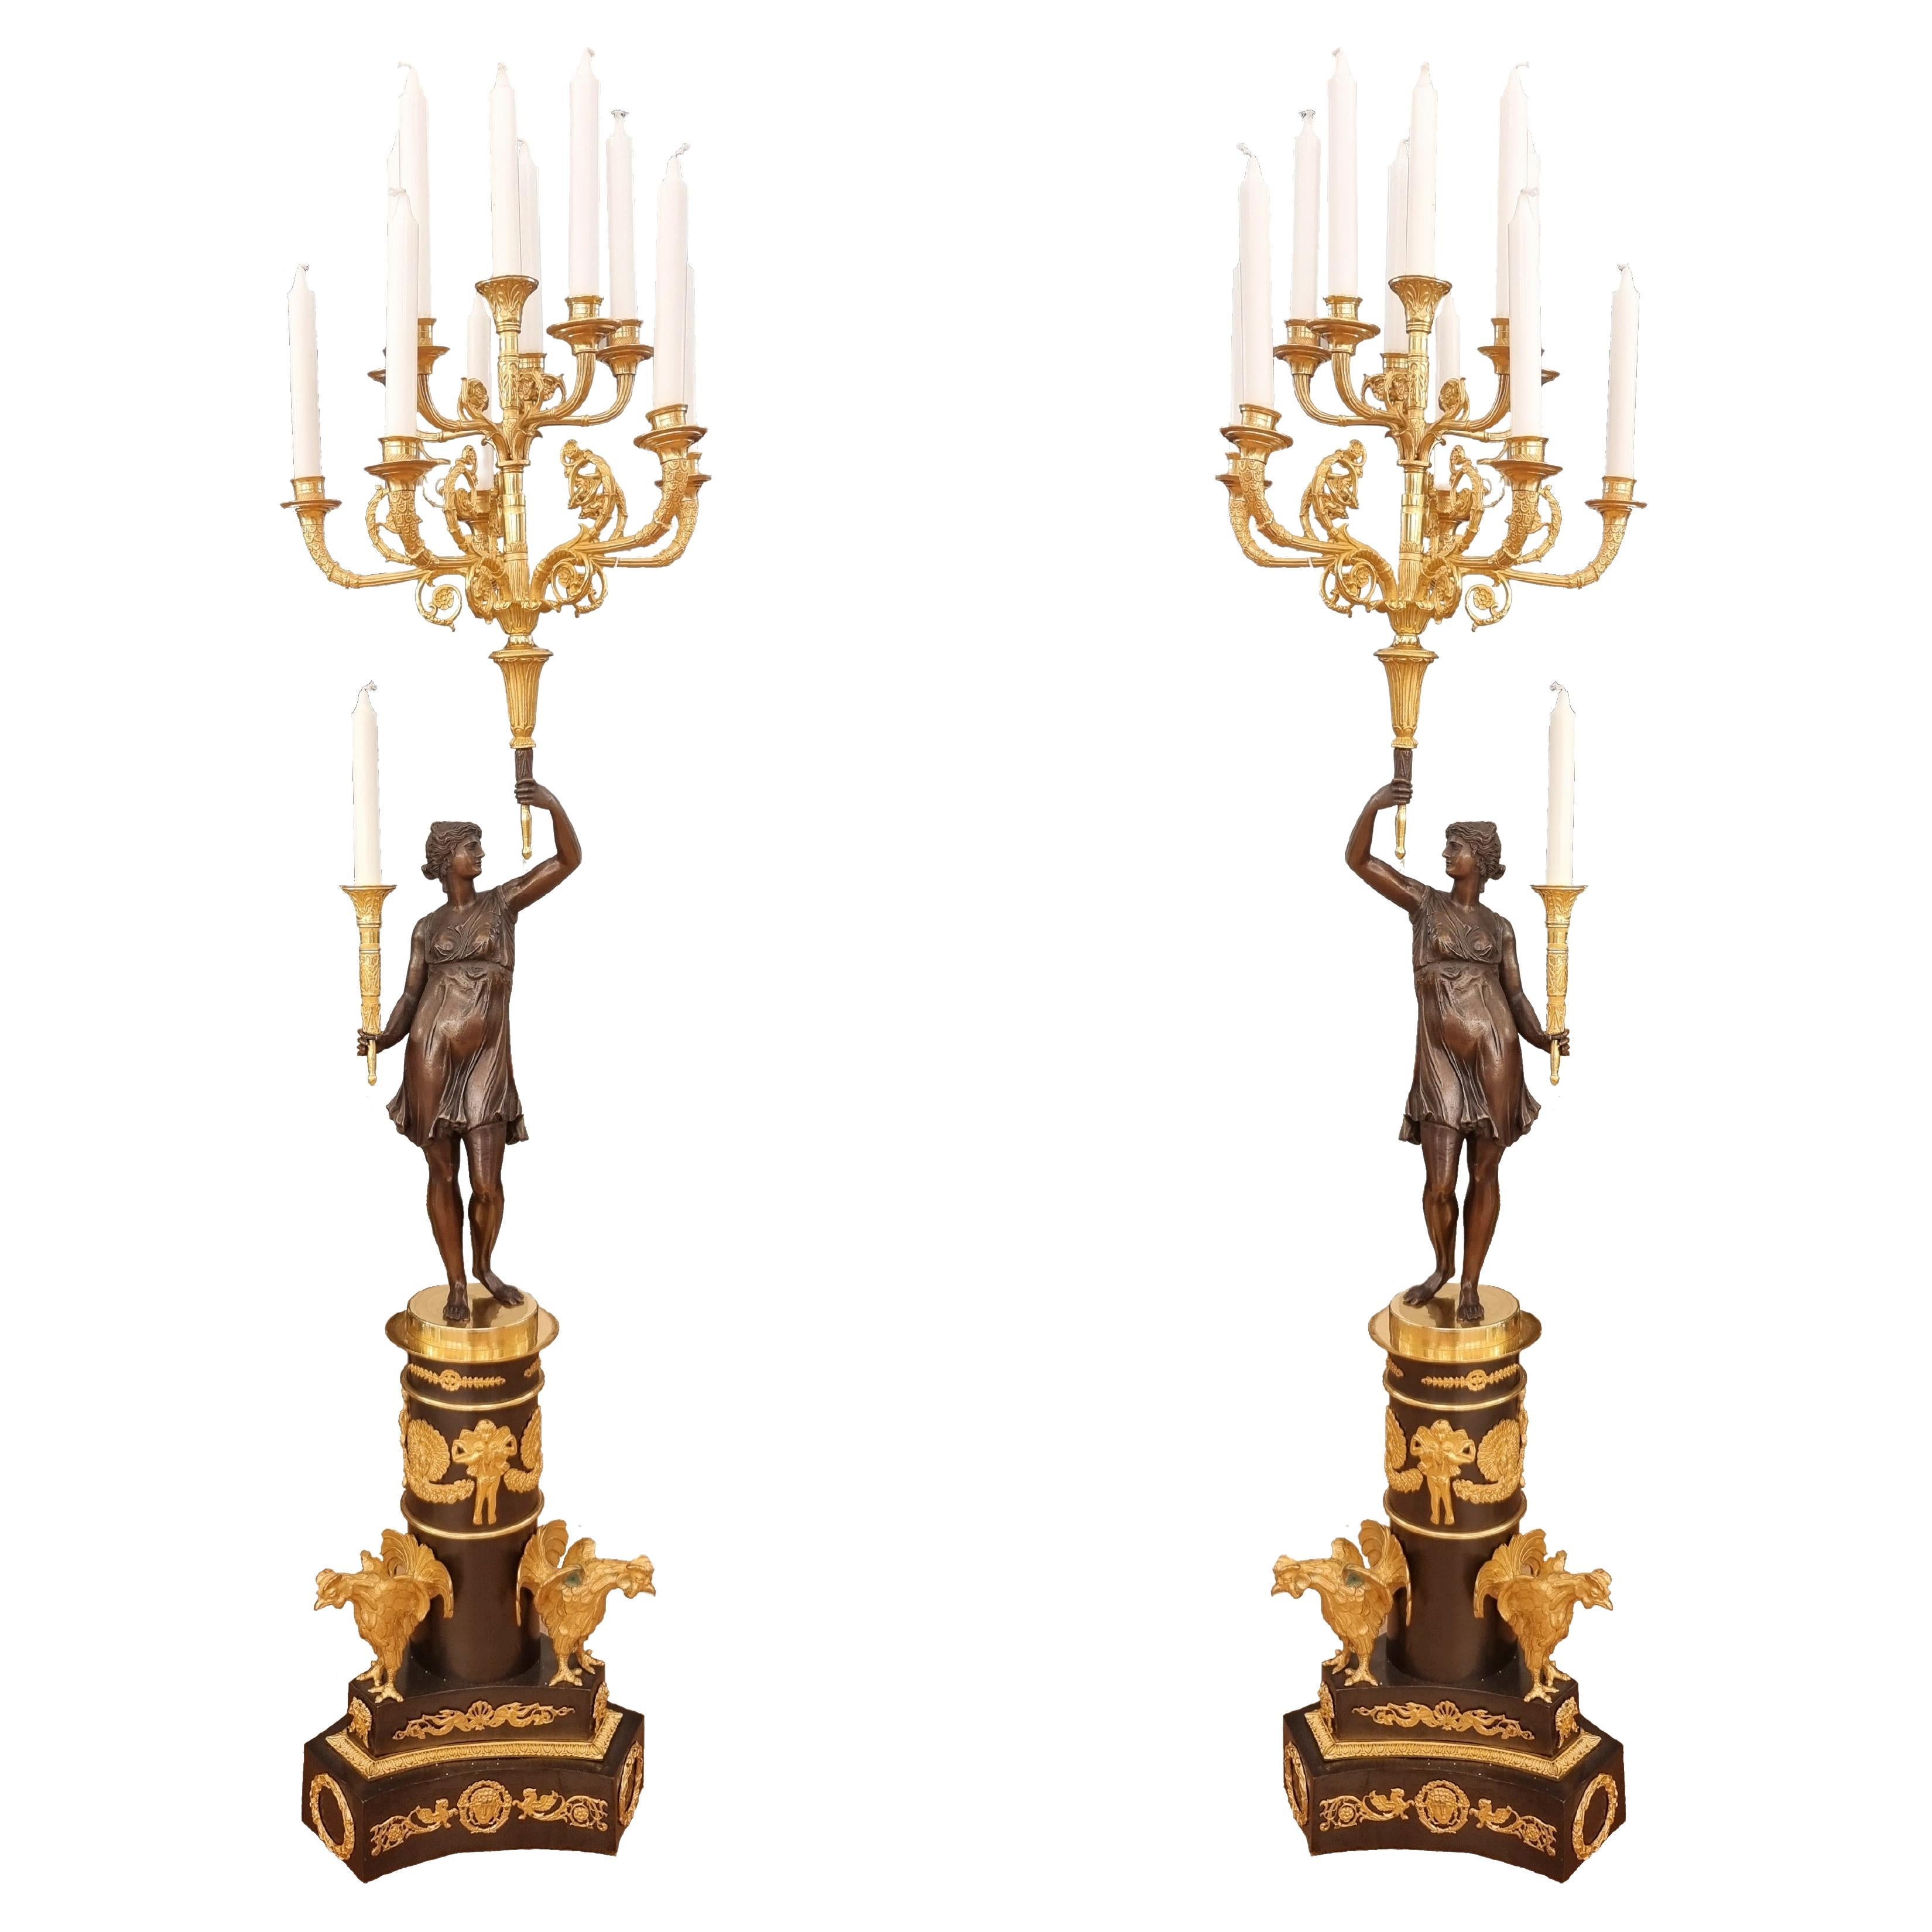 Late 19th century bronze candelabras with sixteen lights